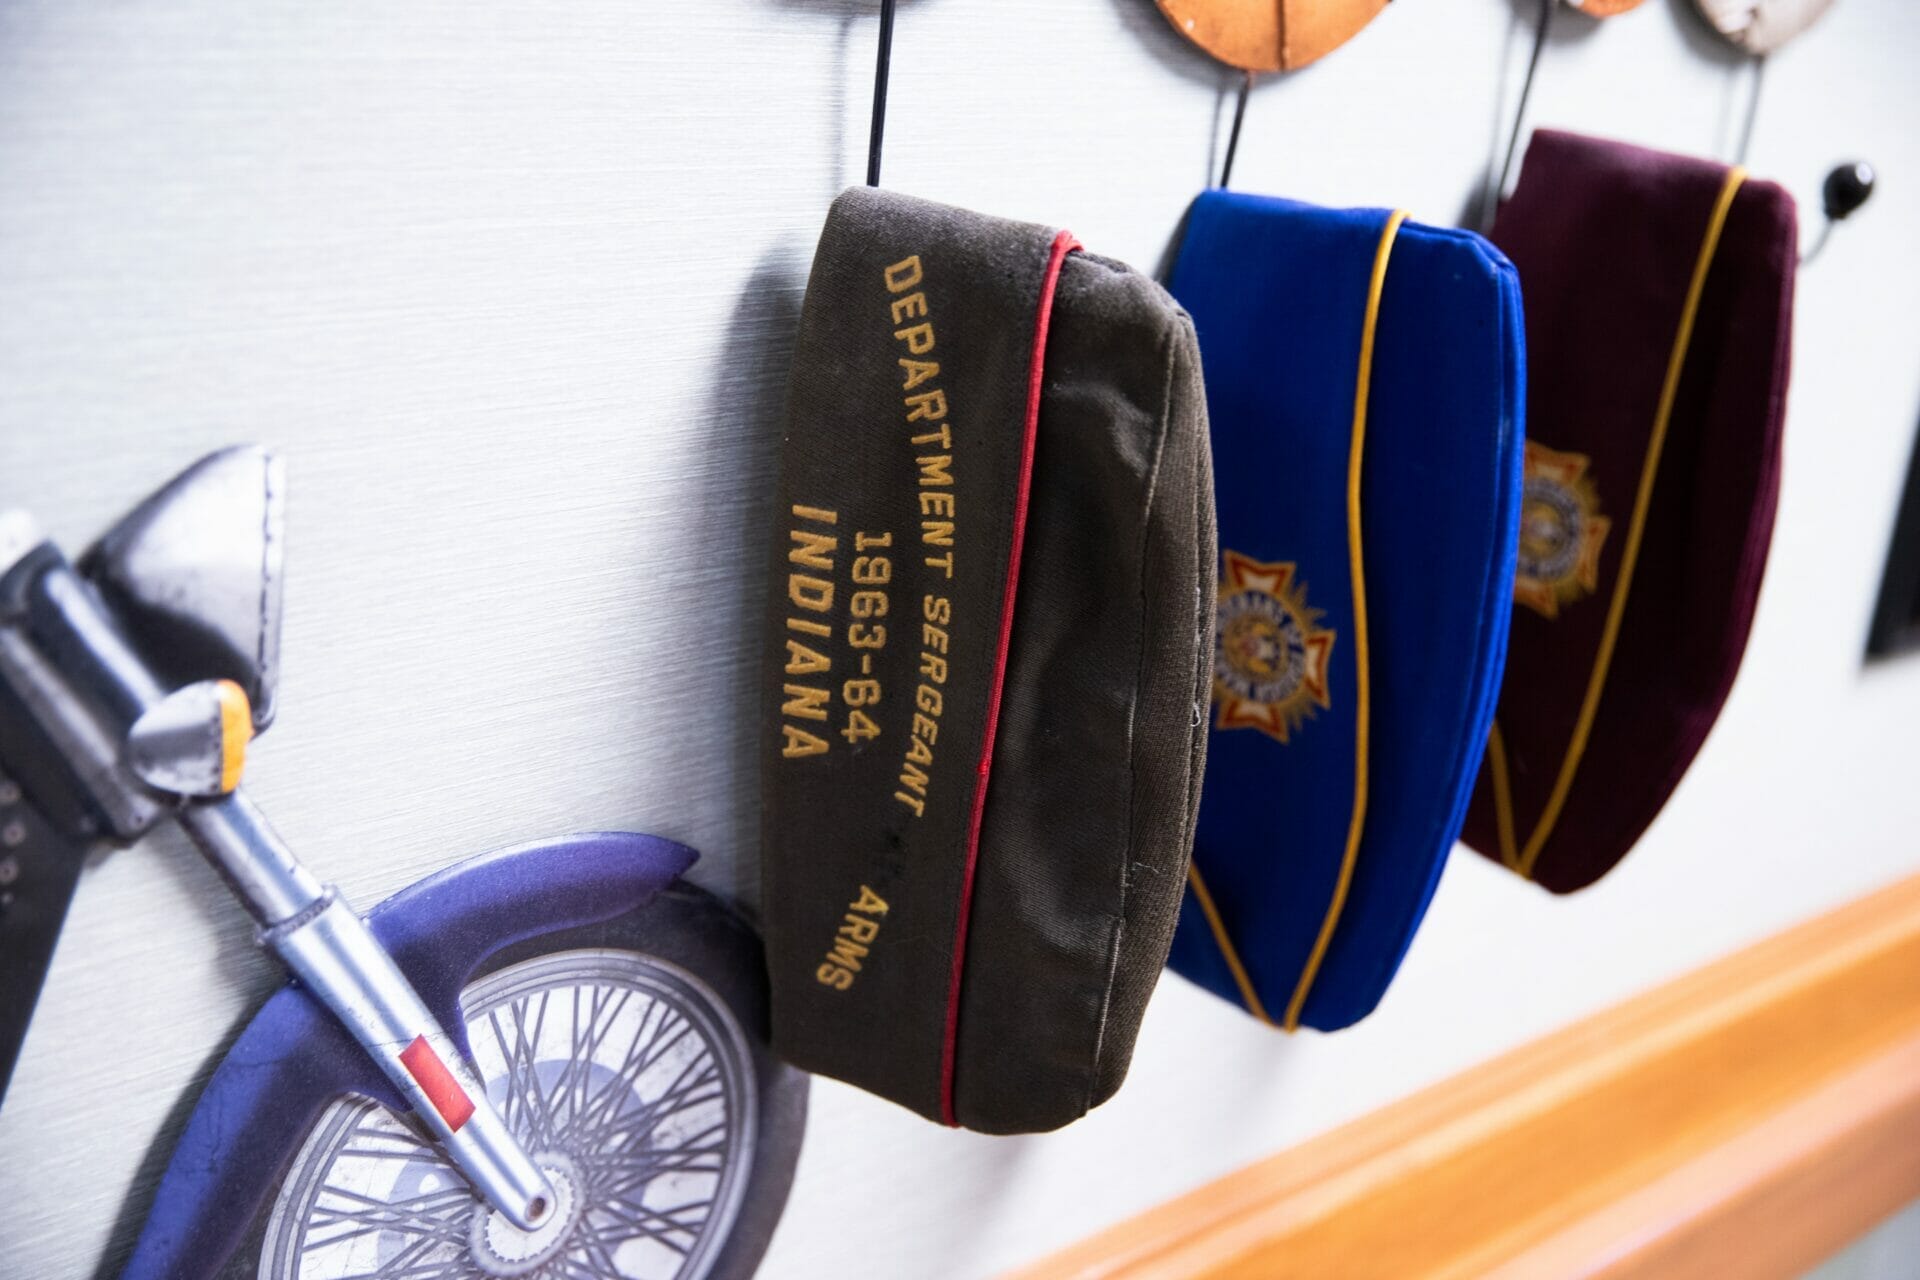 <span  class="uc_style_uc_tiles_grid_image_elementor_uc_items_attribute_title" style="color:#000000;">Allisonville Meadows Assisted Living art piece showing military service hats and a motorcycle.</span>